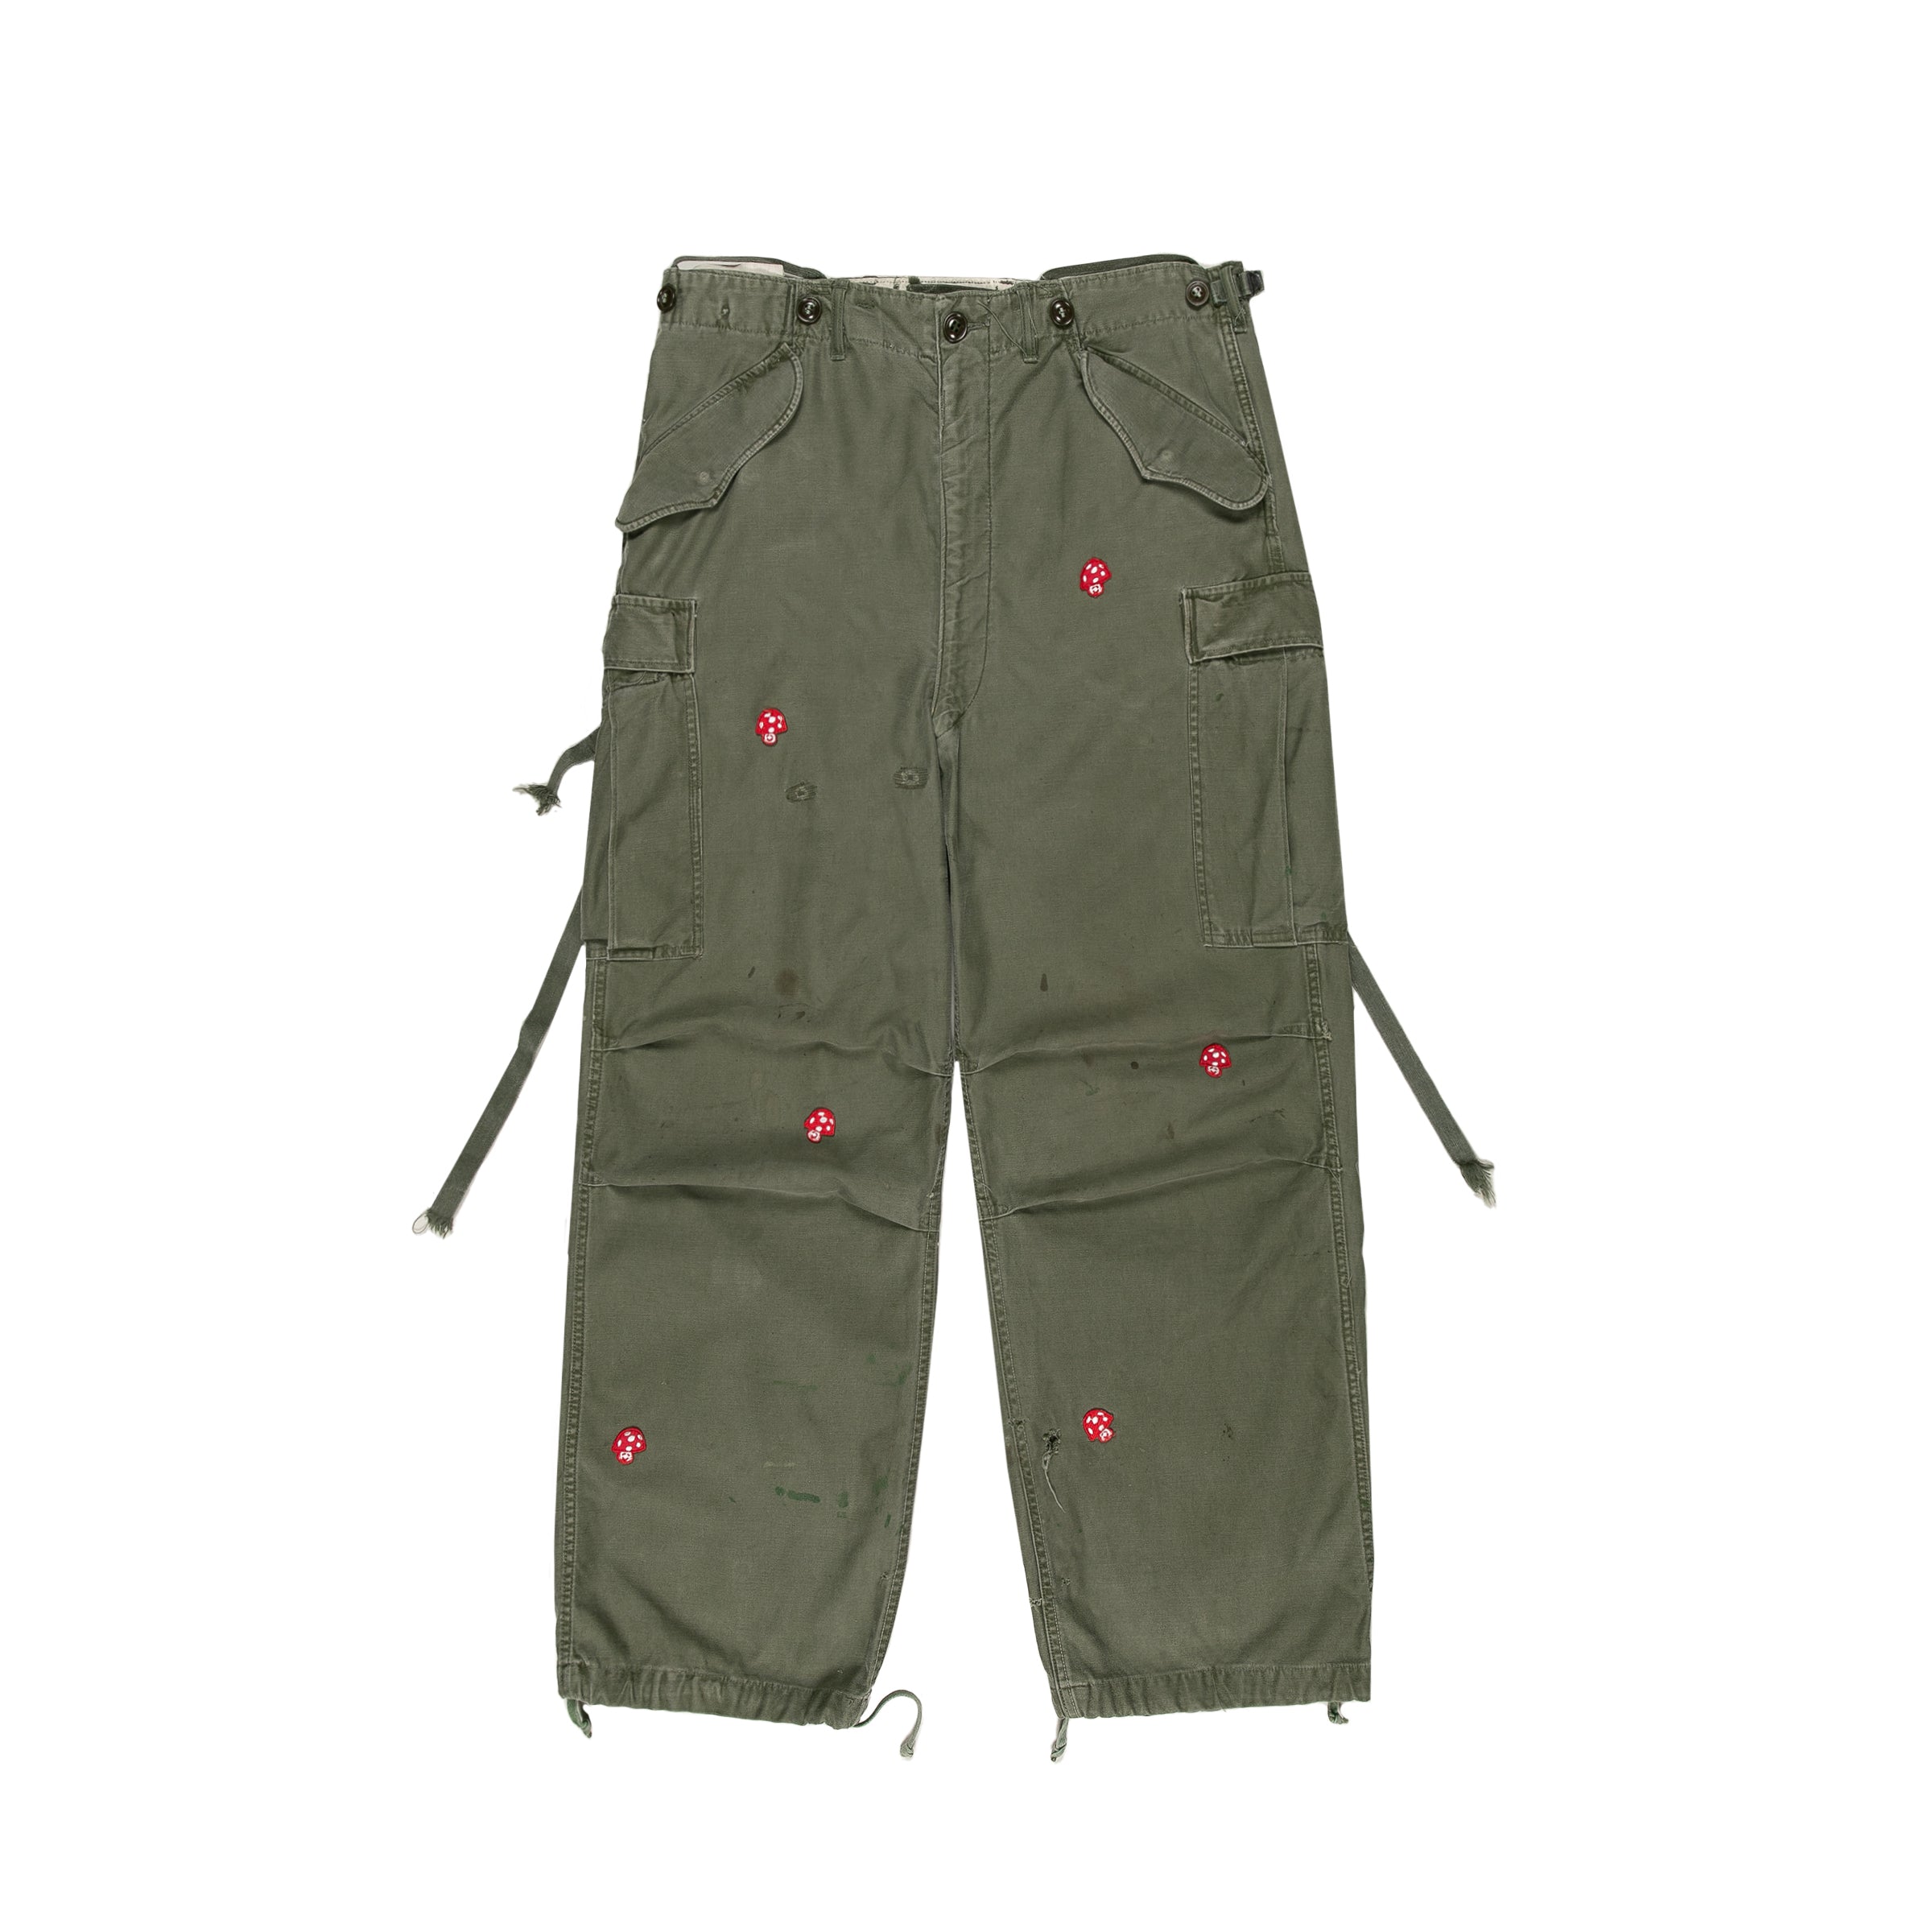 1951 Military Pant on Shrooms